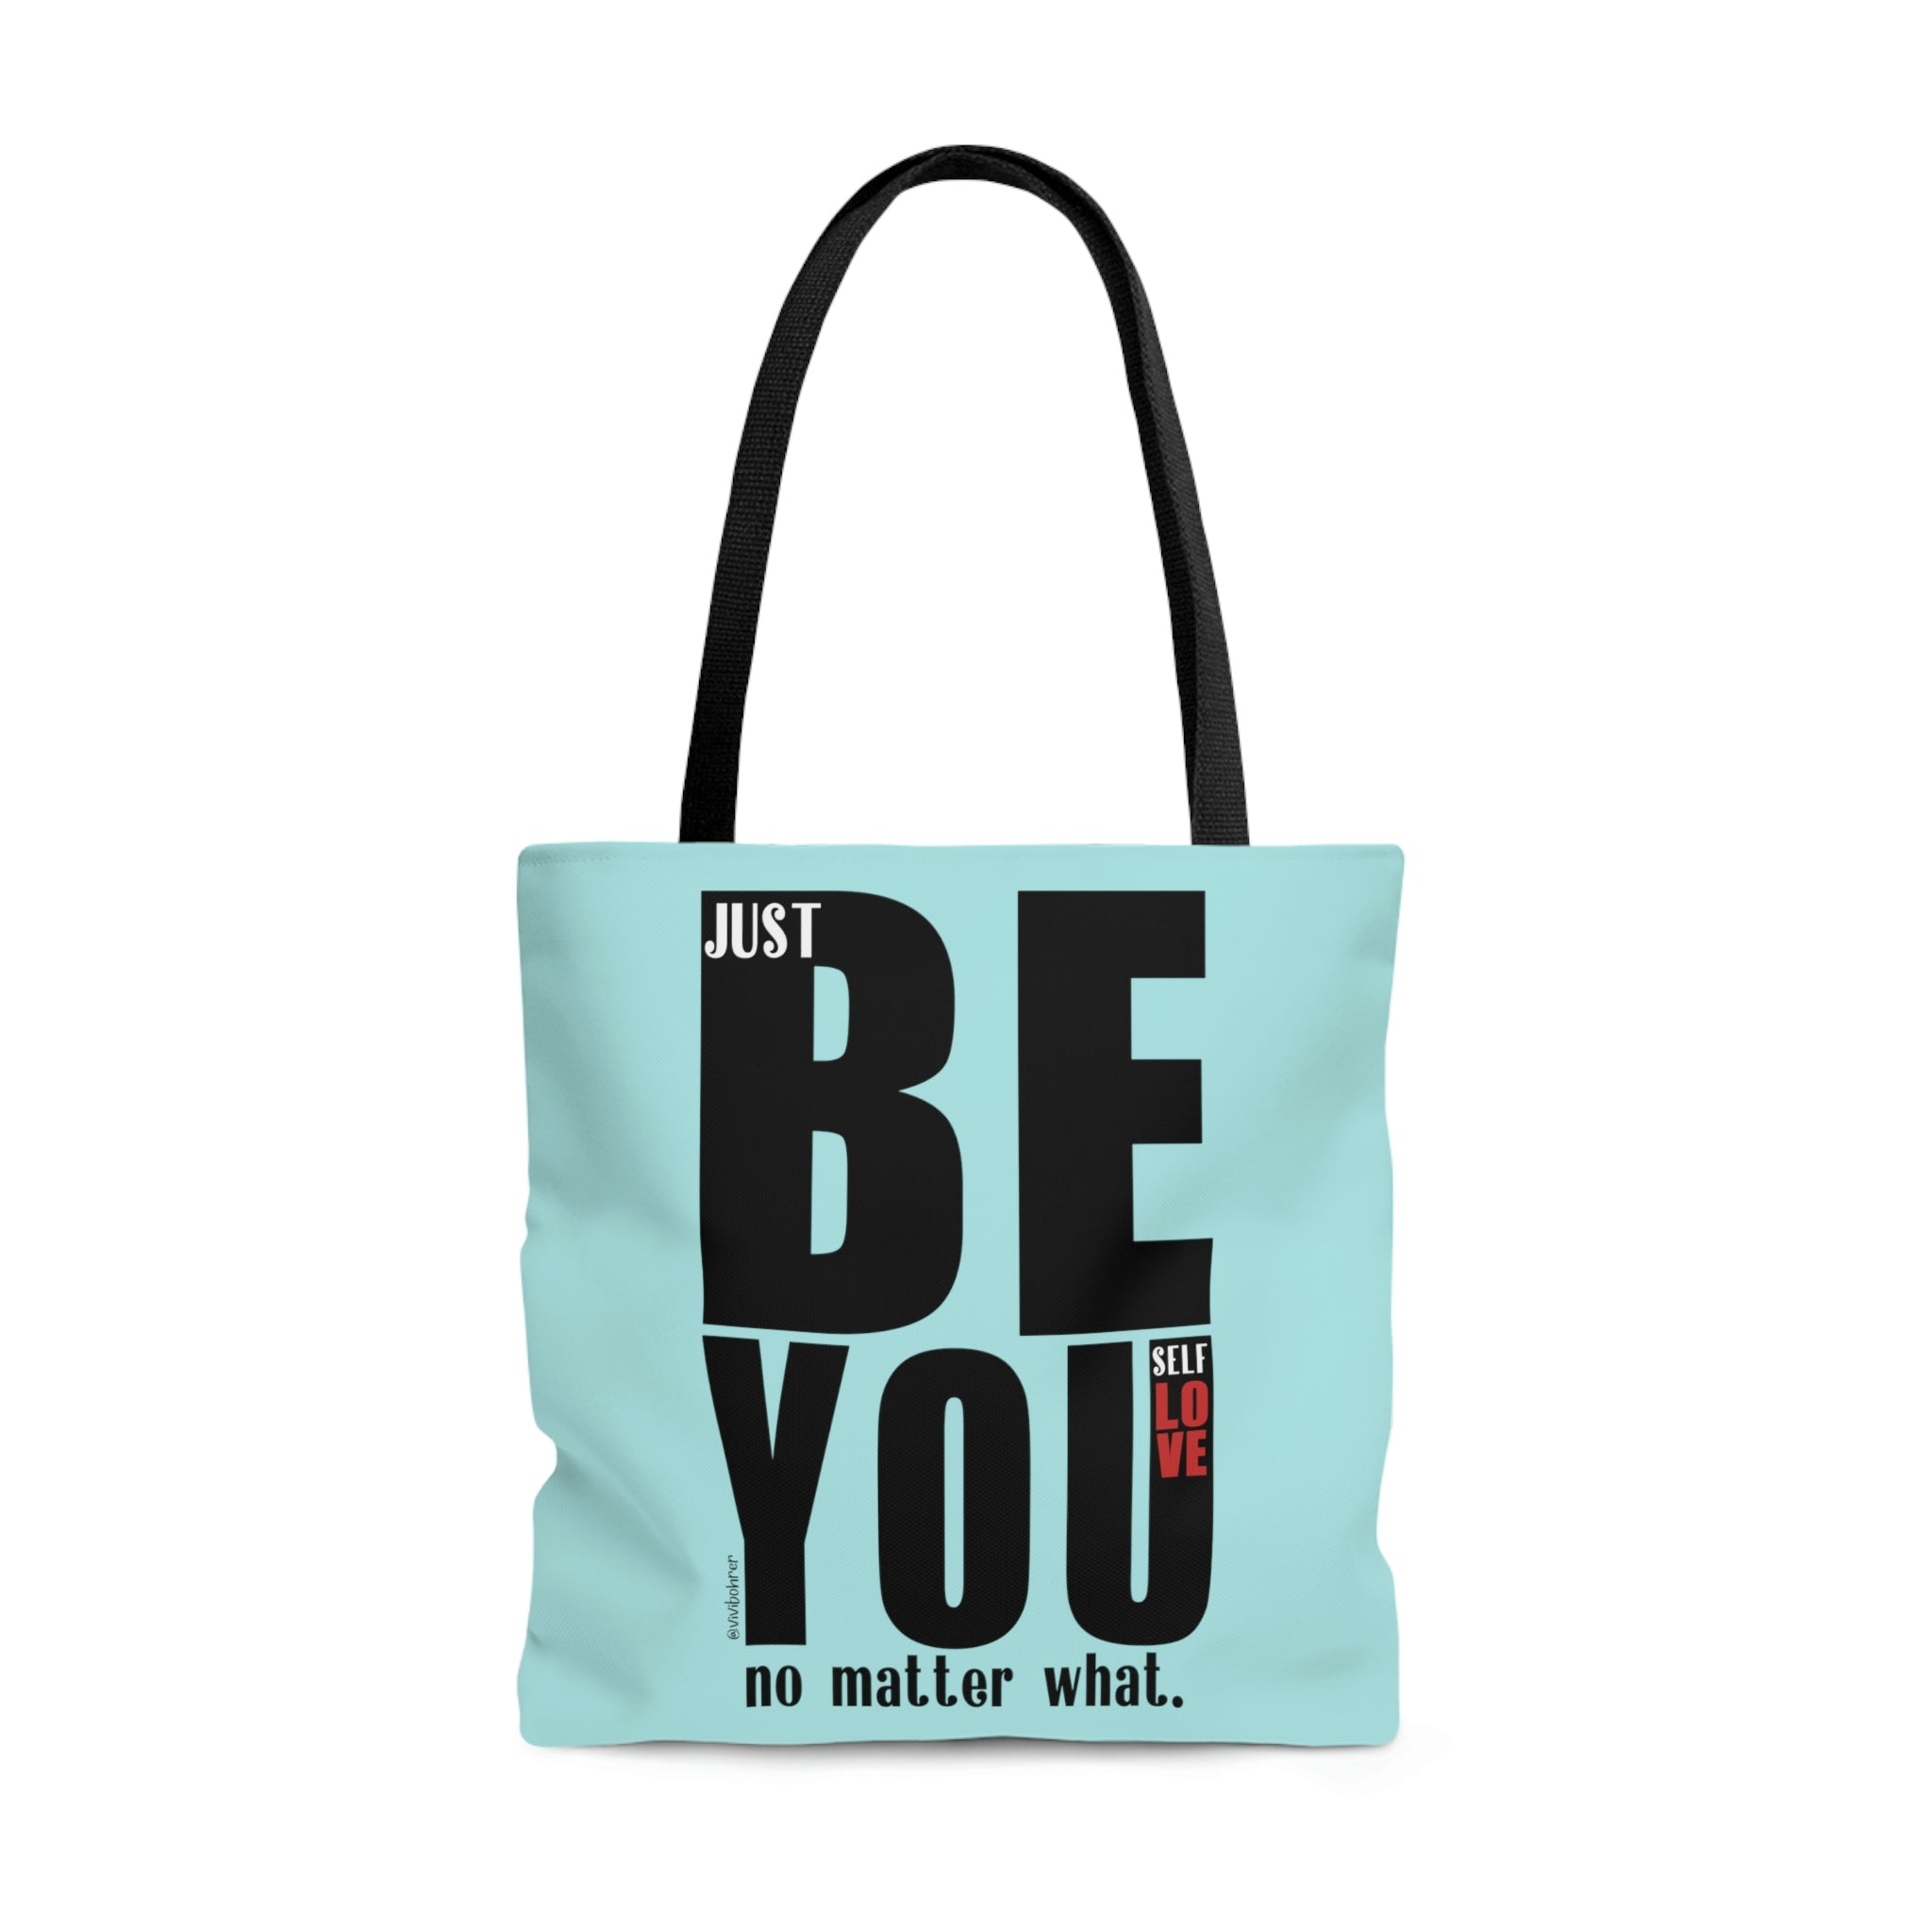 ♡ Just BE You no Matter What ::  PRACTICAL TOTE BAG